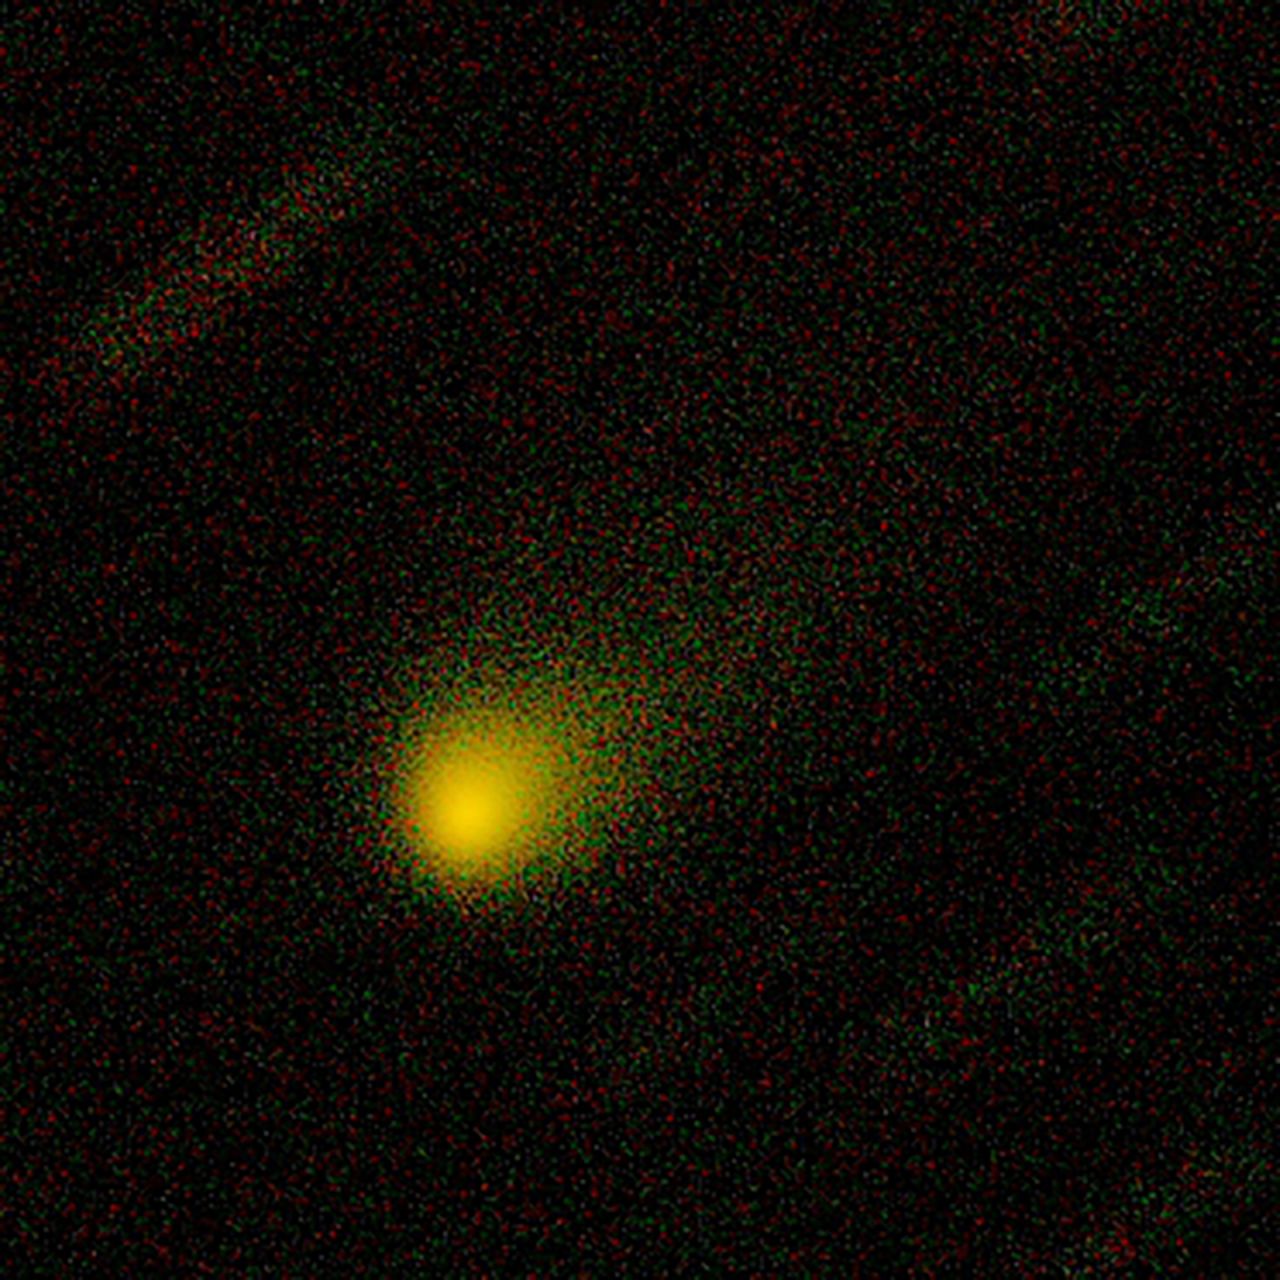 This is a two-color composite image of comet 2I/Borisov captured by the Gemini North telescope on September 10.